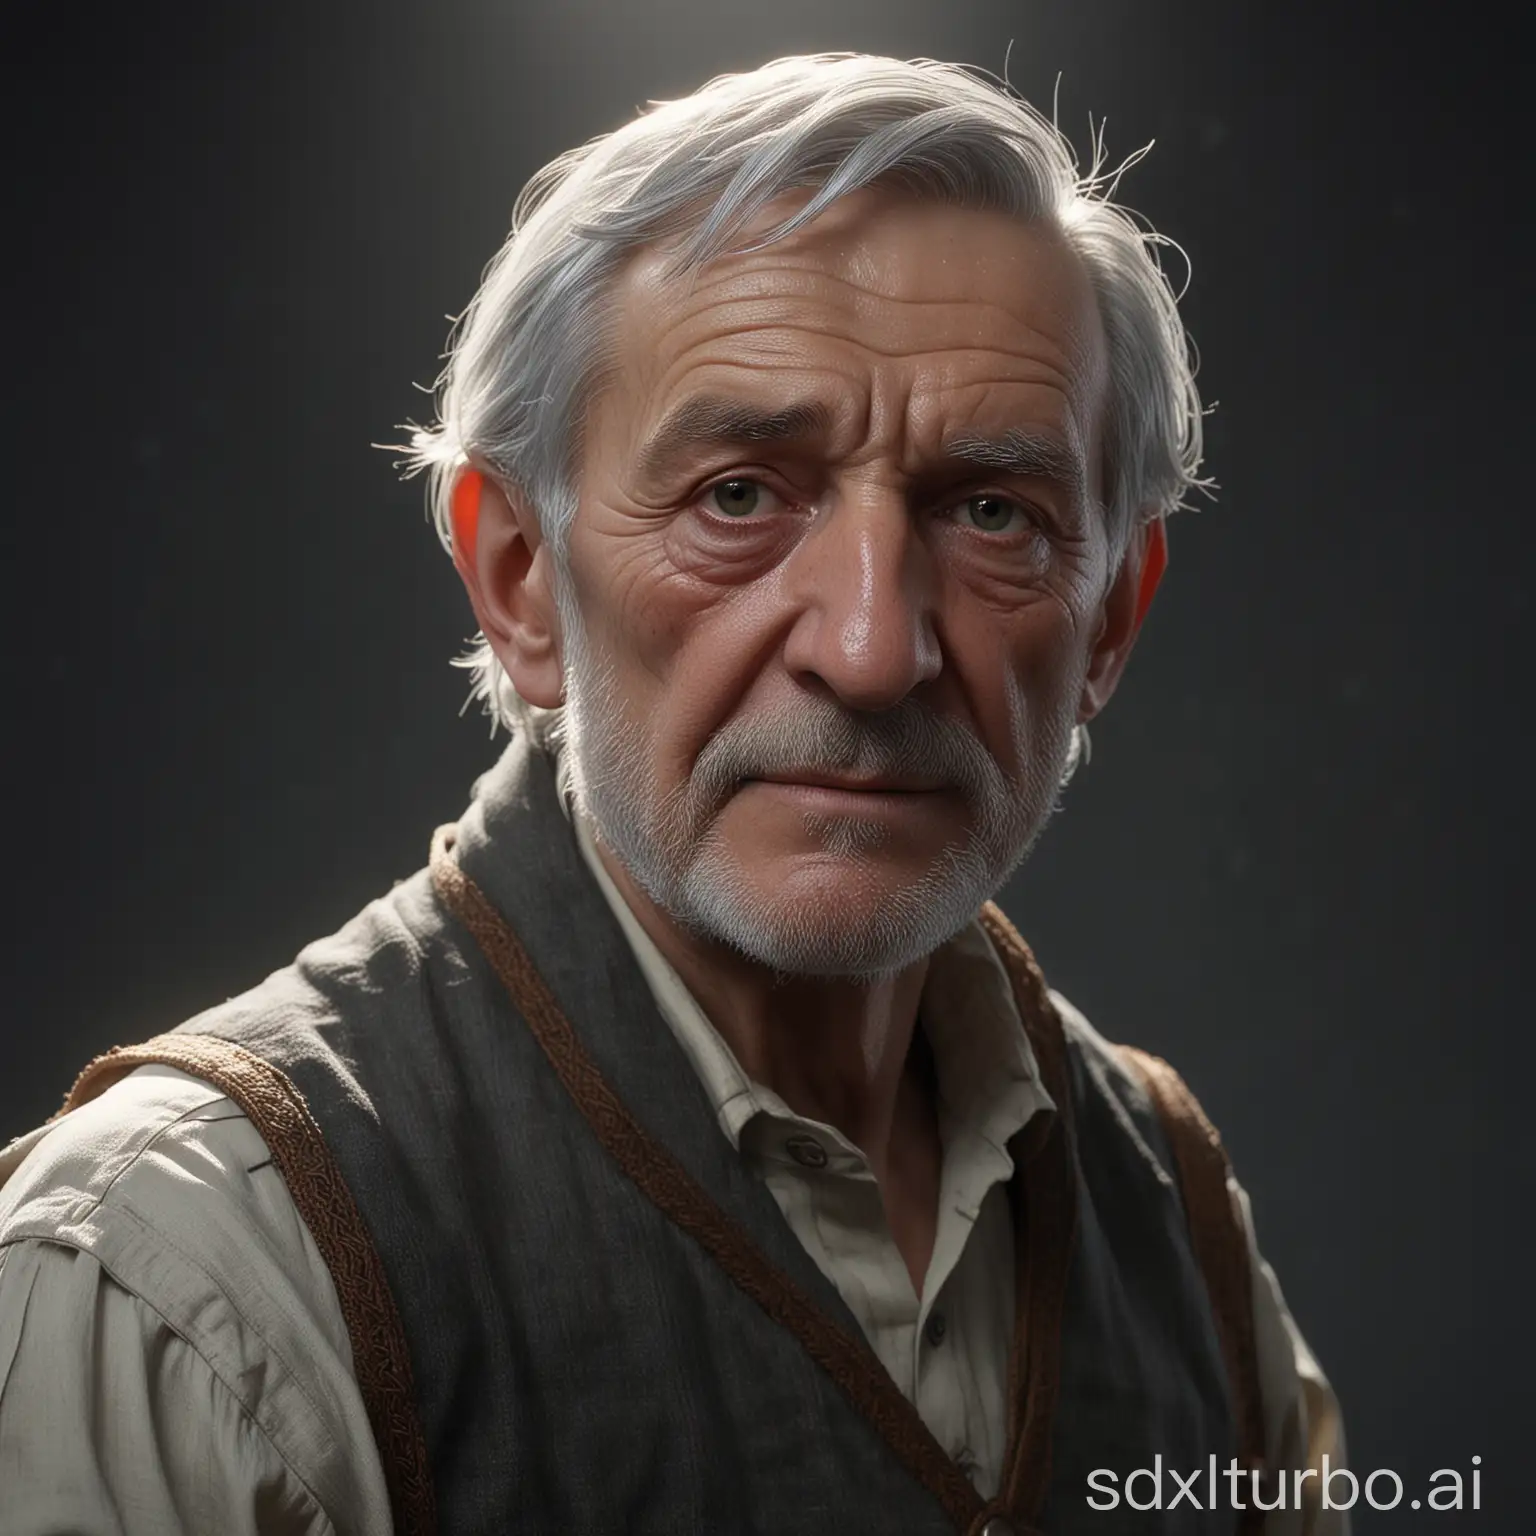 Abraham, an elderly man with gray hair, dressed in farmer clothes from the time of Middle Ages, Cinematic lighting, Unreal Engine 5, Cinematic, Color Grading, Editorial Photography, Photography, Photoshoot, Shot on 70mm lens, Depth of Field, DOF, Tilt Blur, Shutter Speed 1/1000, F/22, White Balance, 32k, Super-Resolution, Megapixel, ProPhoto RGB, VR, tall, epic, artgerm, alex ross, Halfrear Lighting, Backlight, Natural Lighting, Incandescent, Optical Fiber, Moody Lighting, Cinematic Lighting, Studio Lighting, Soft Lighting, Volumetric, Contre-Jour, dark lighting, Accent Lighting, Global Illumination, Screen Space Global Illumination, Ray Tracing Global Illumination, Red Rim light, cool color grading 45,